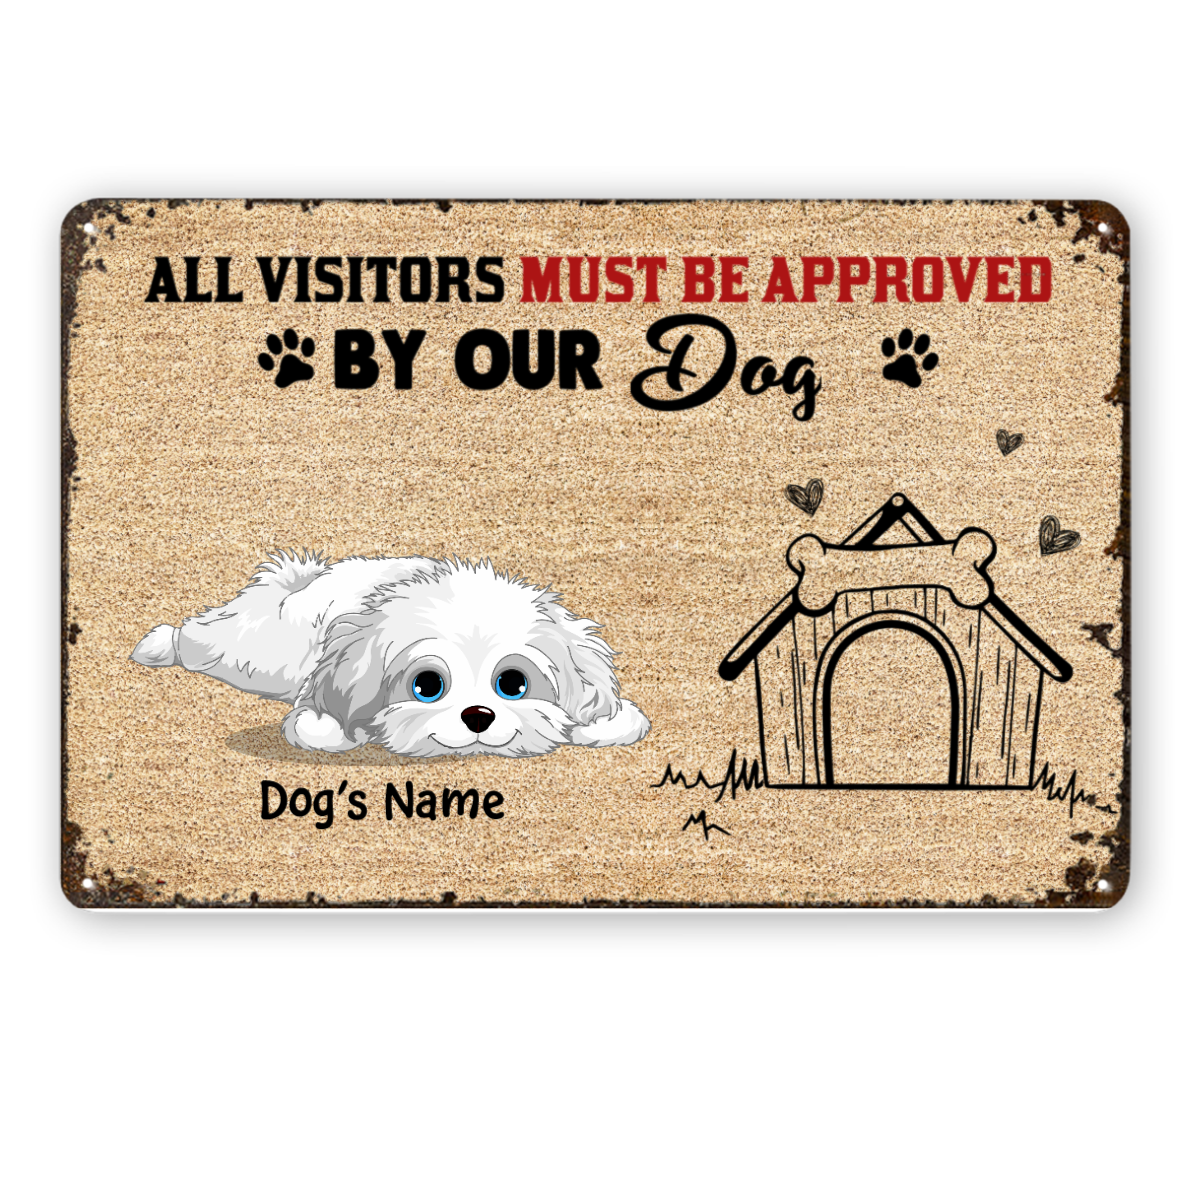 Visitors Must Be Approved By Our Dogs Personalized Metal Signs